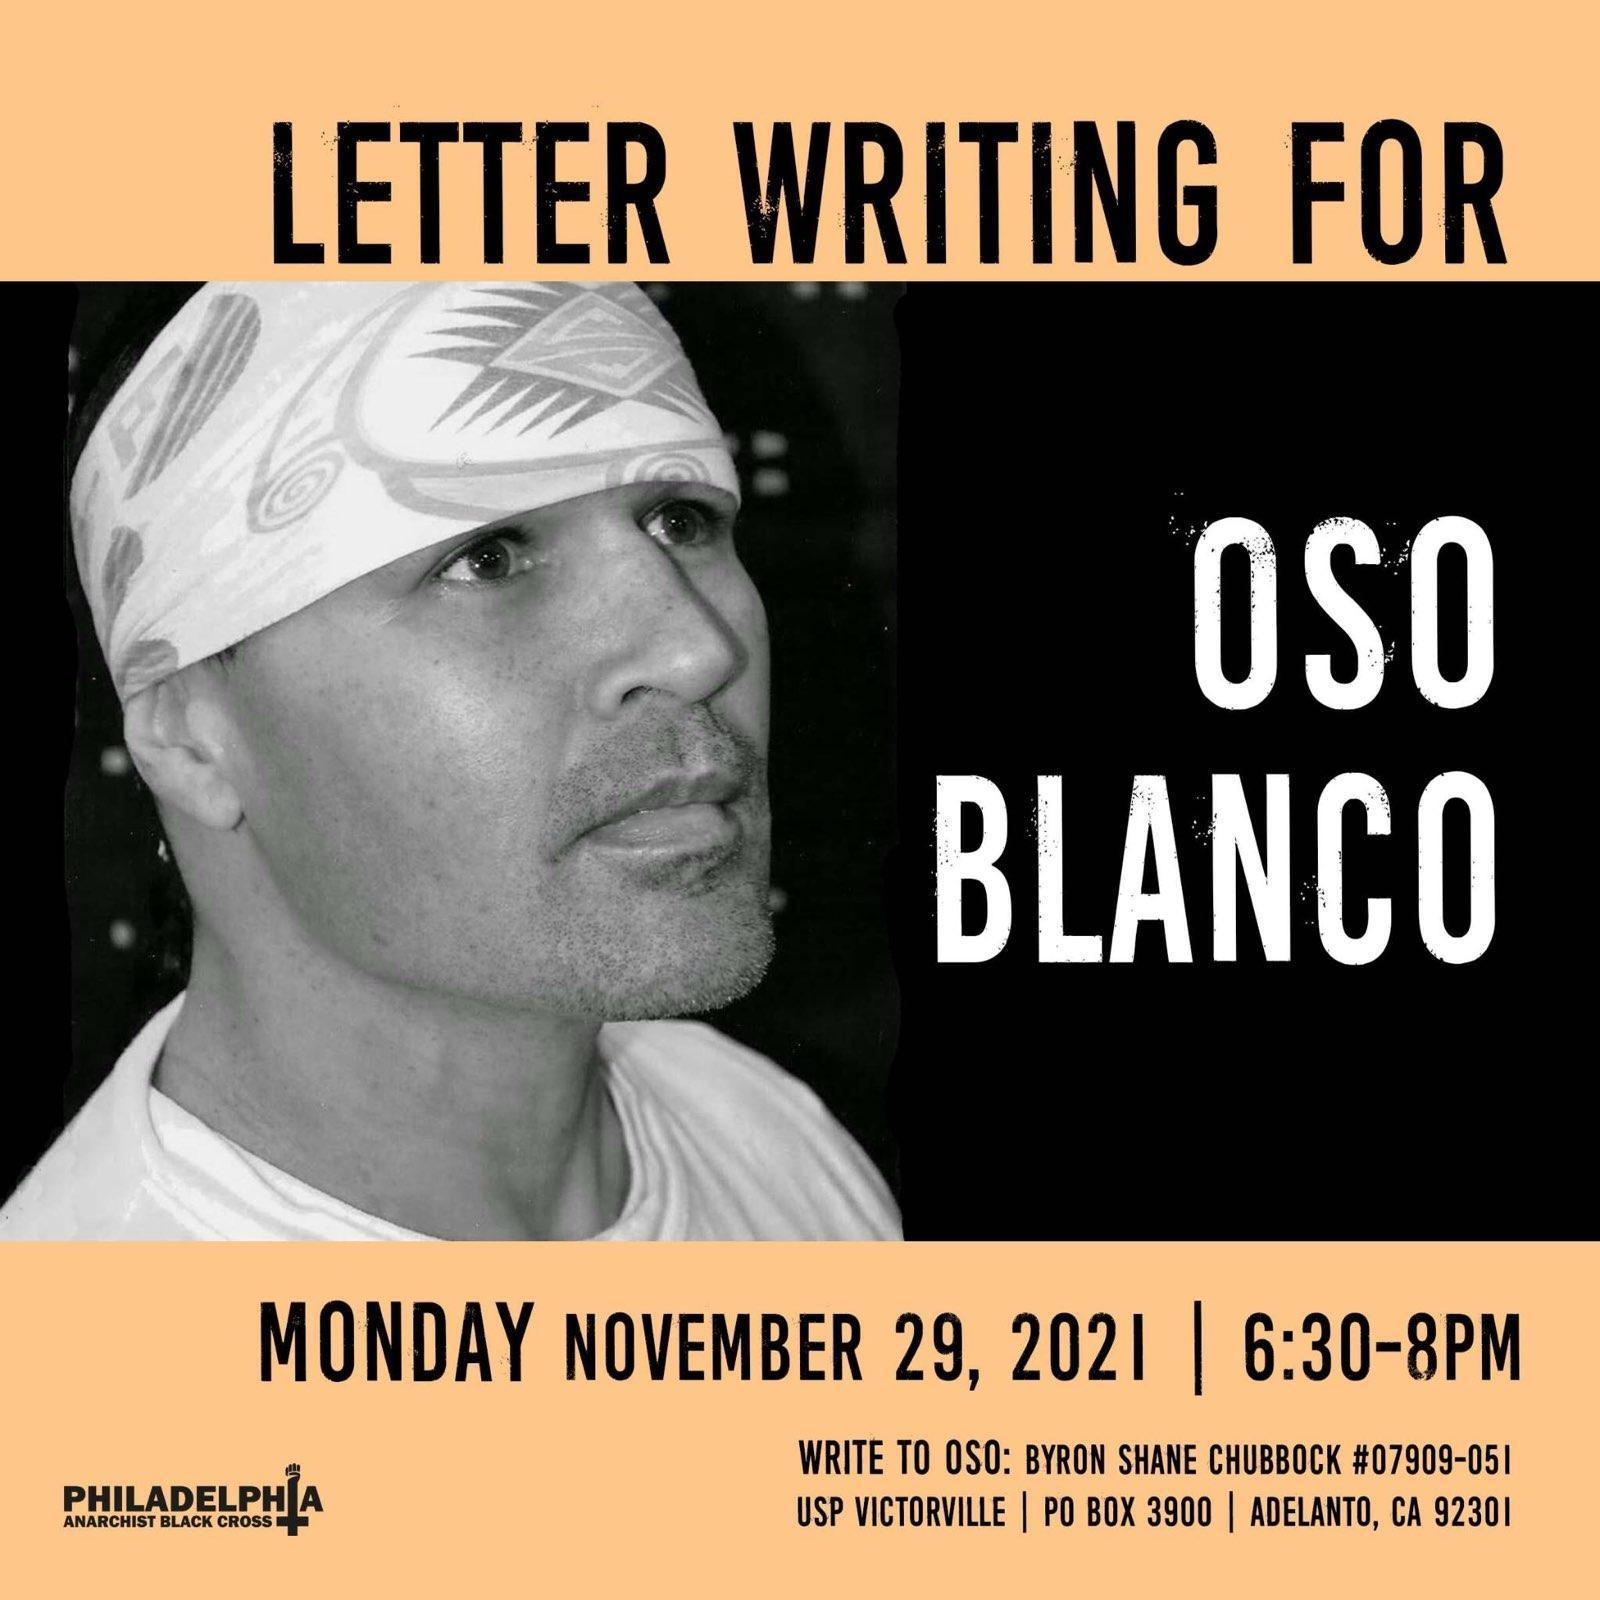 Monday November 29th: Letter-writing for Oso Blanco